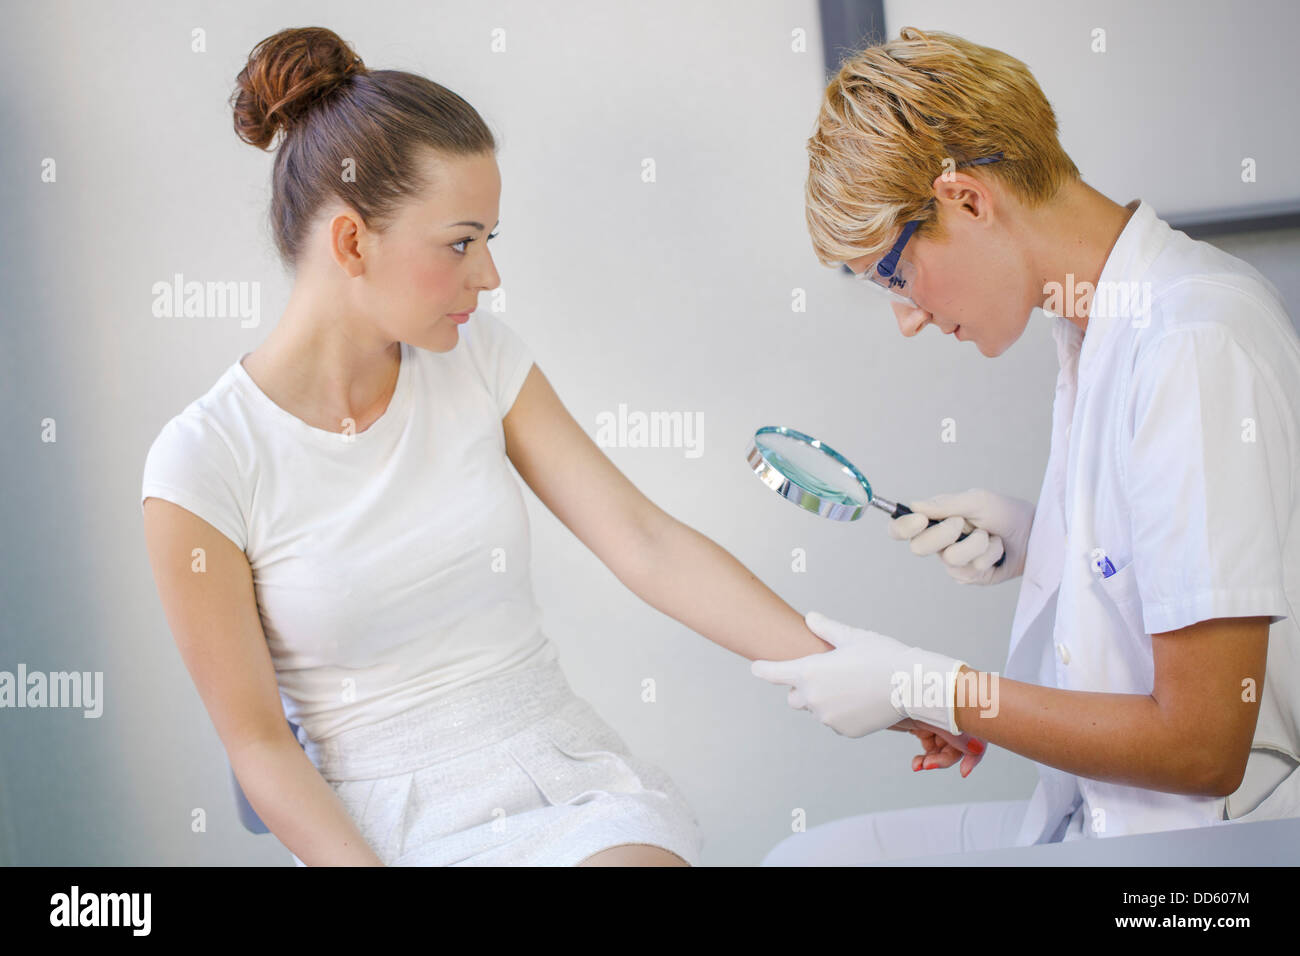 Dermatology, Patient in Treatment Stock Photo